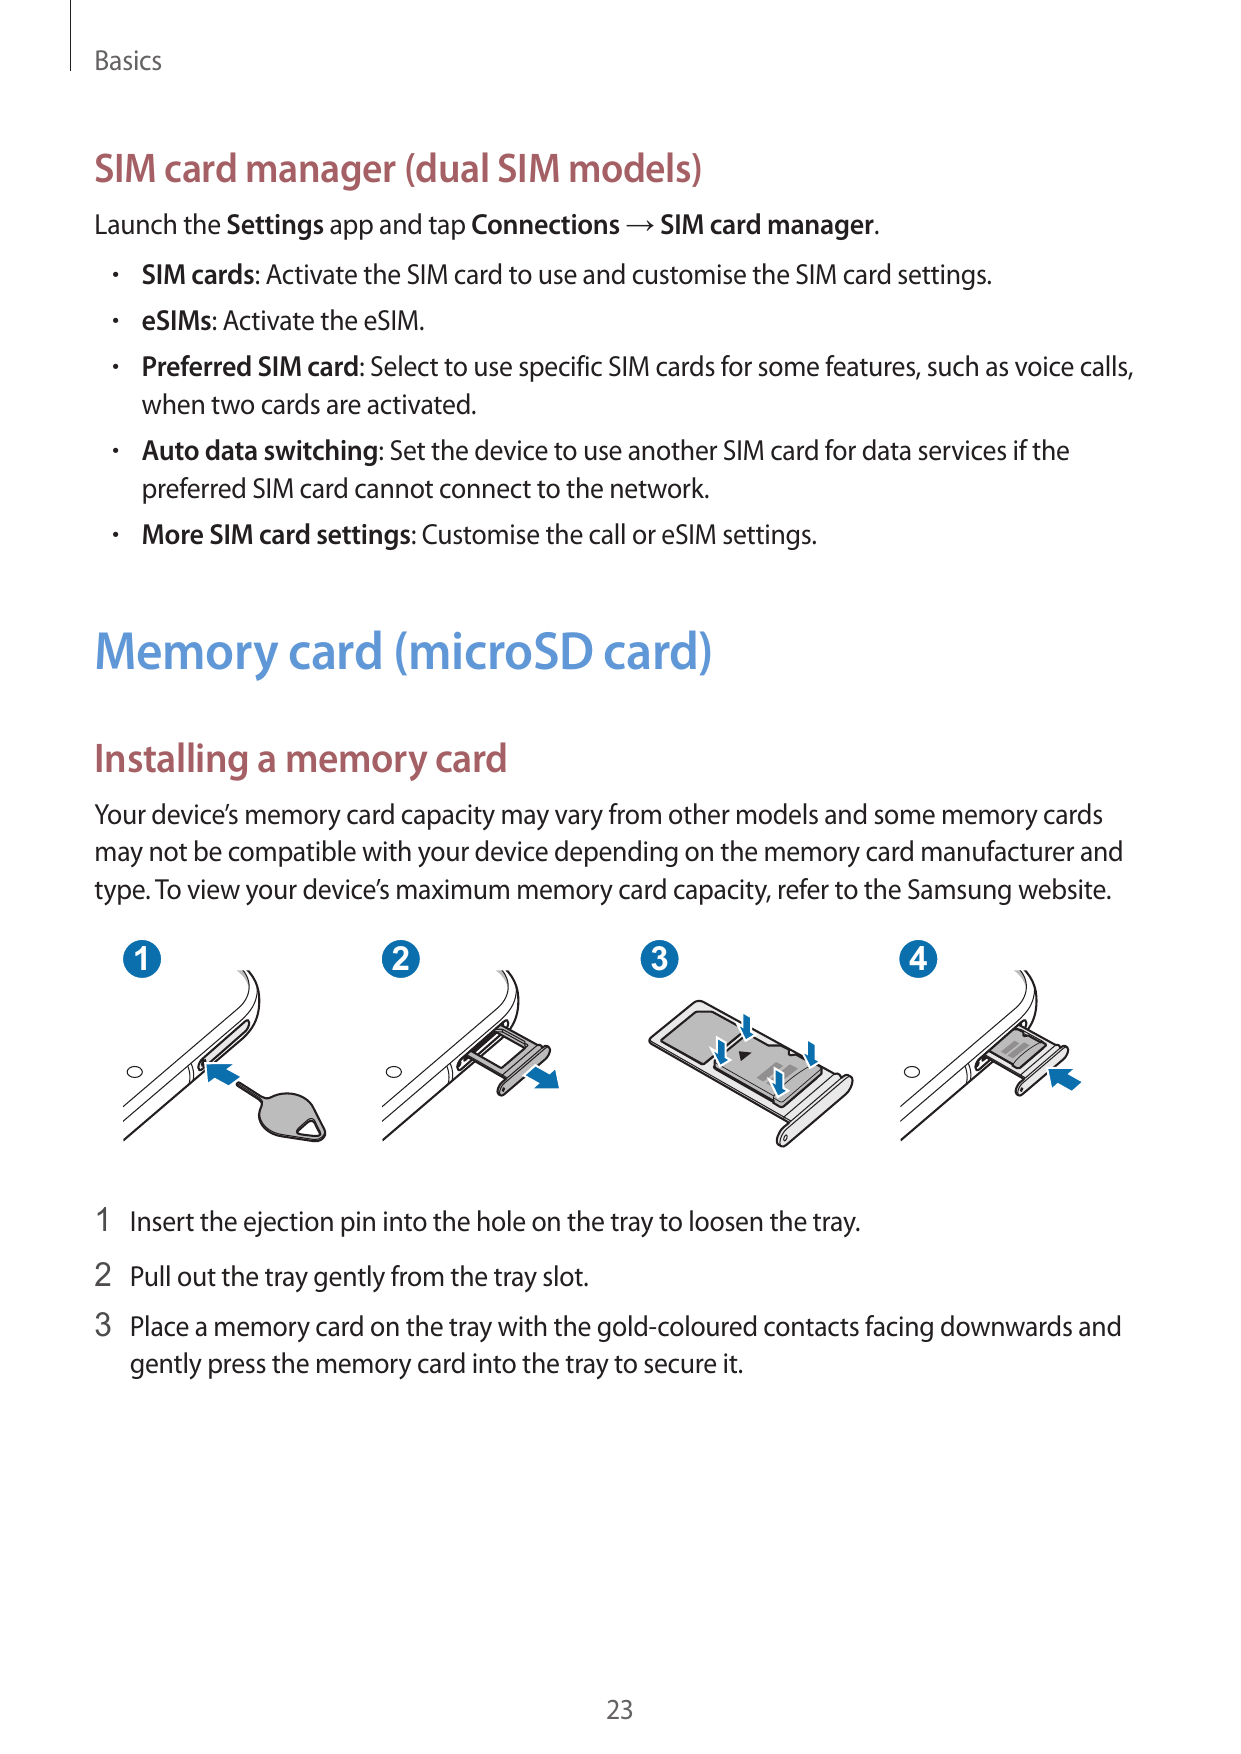 BasicsSIM card manager (dual SIM models)Launch the Settings app and tap Connections → SIM card manager.• SIM cards: Activate the